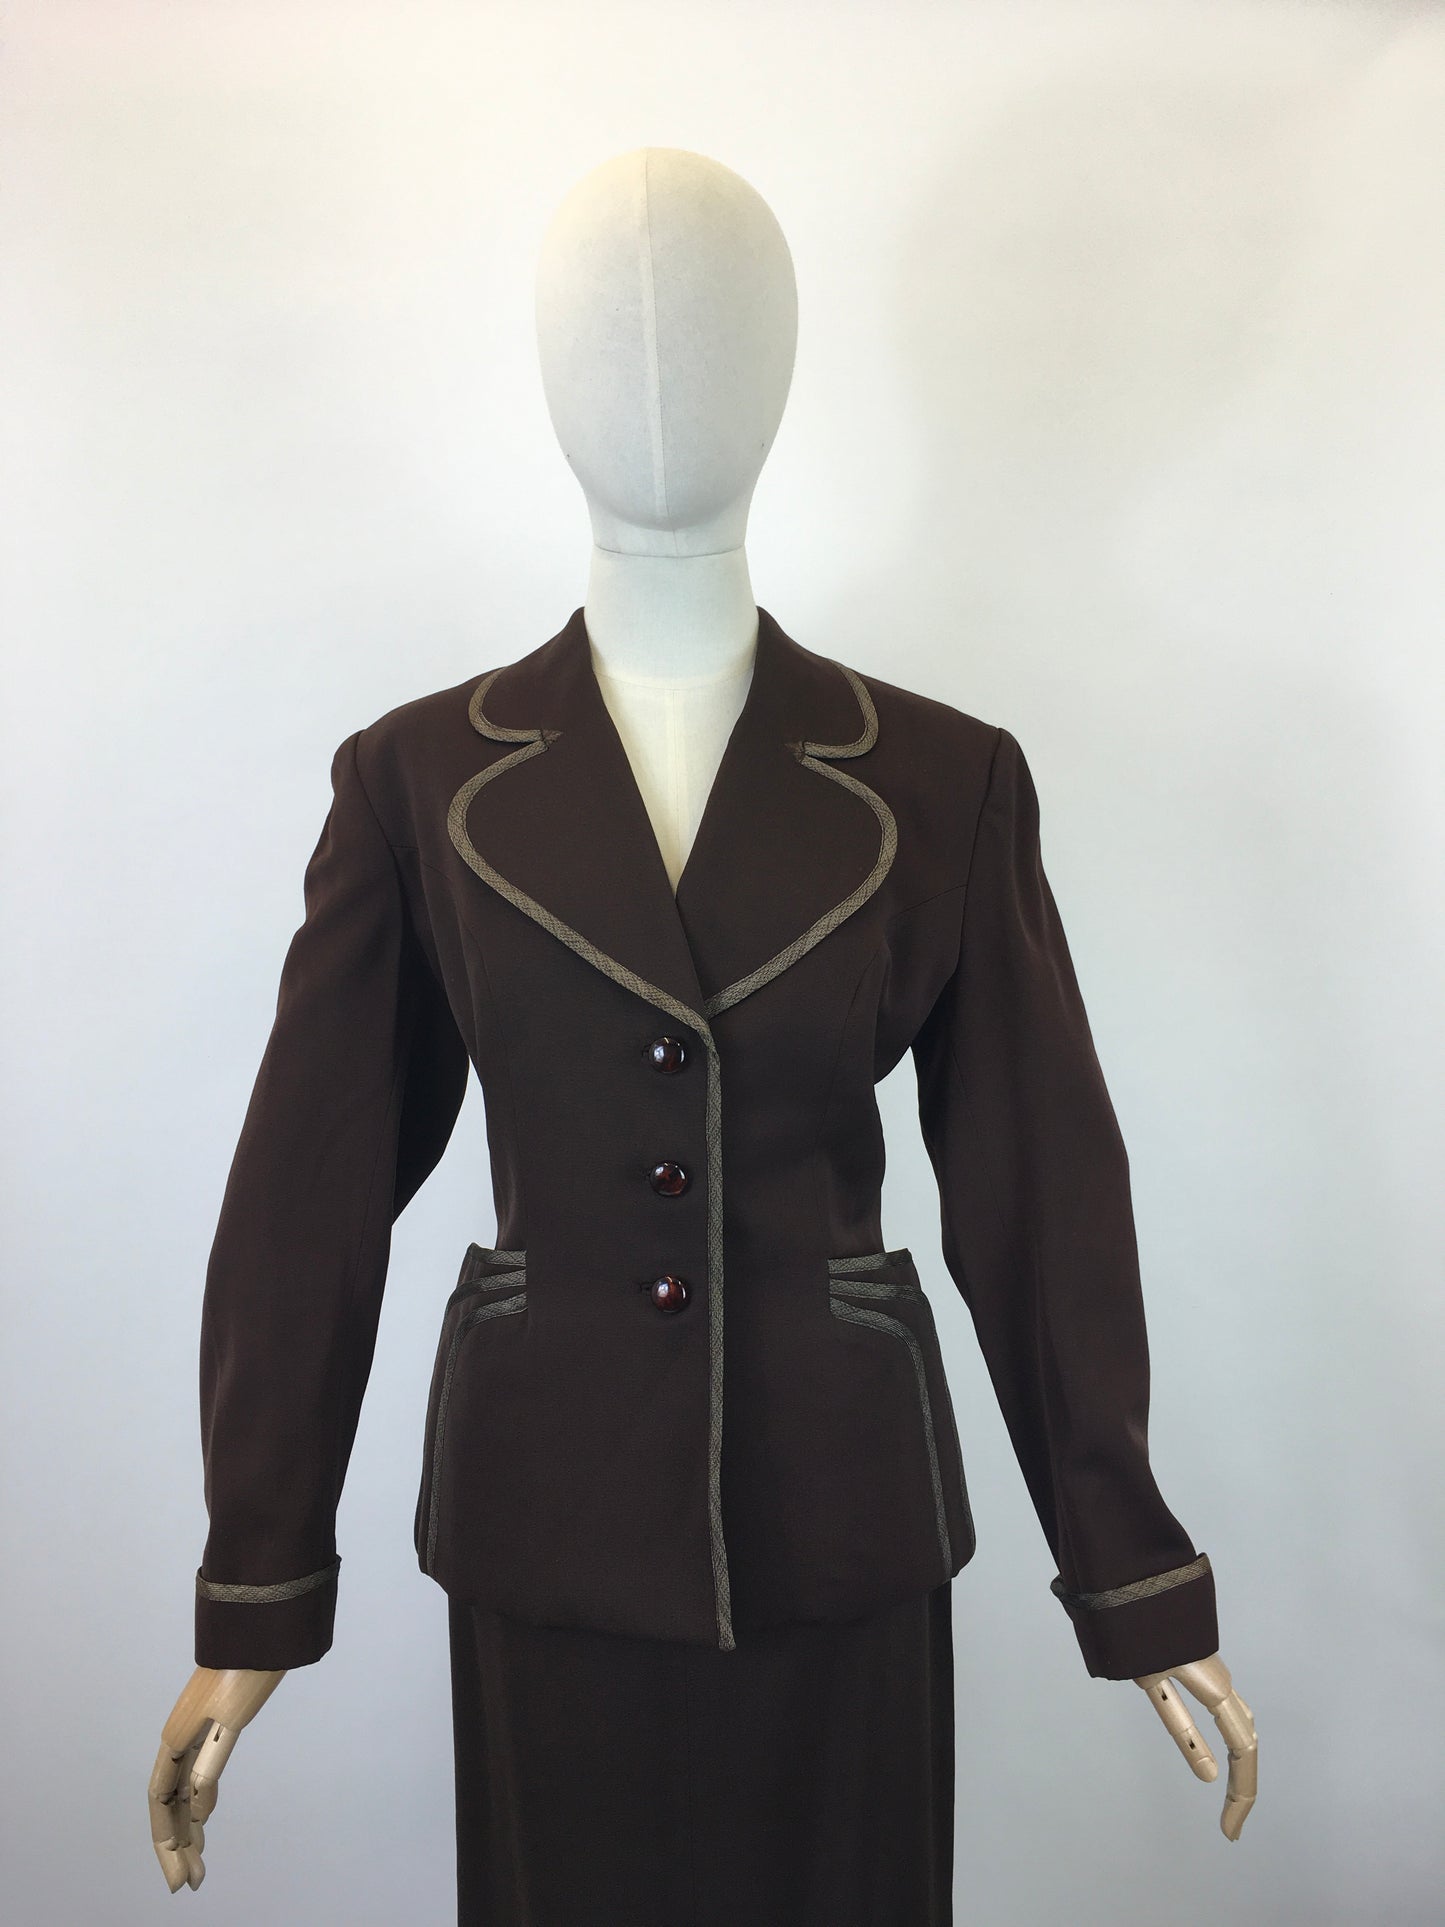 Original Sensational 1940’s American 2pc Suit by ‘ Betty Hill, California’ - In Rich Chocolate Brown with Stunning Details